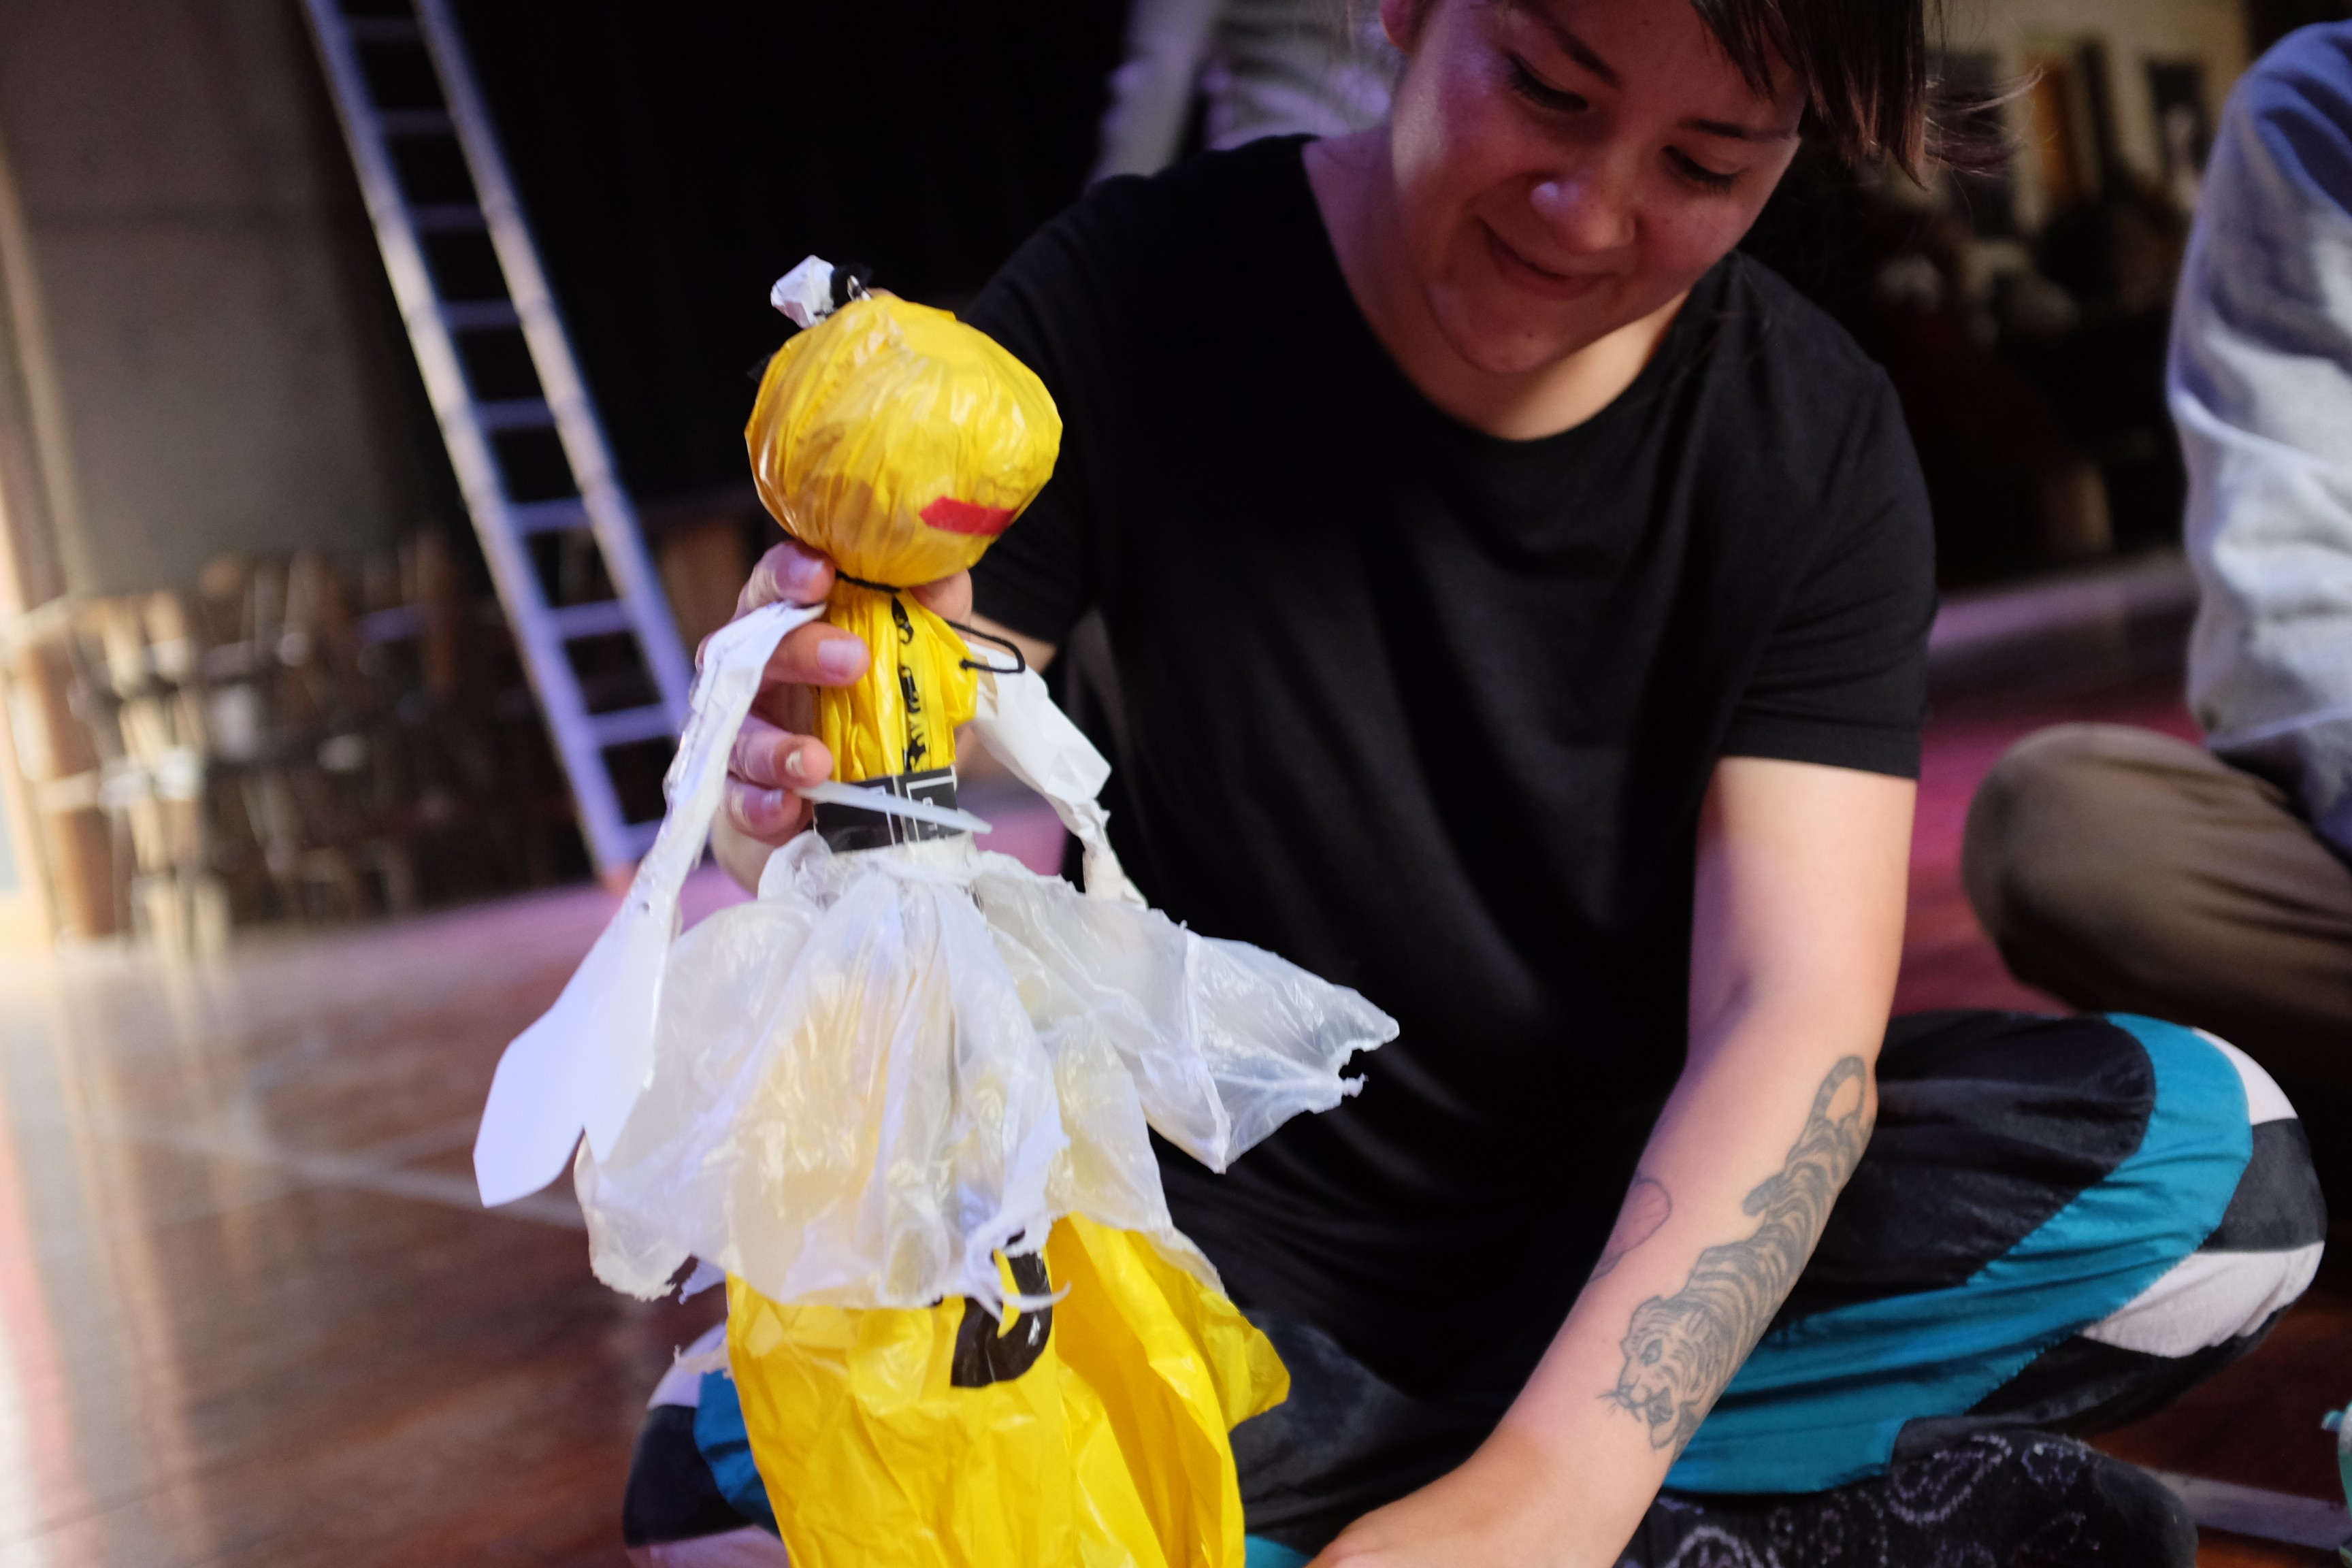 A woman sitting on the ground holding a small yellow puppet figure